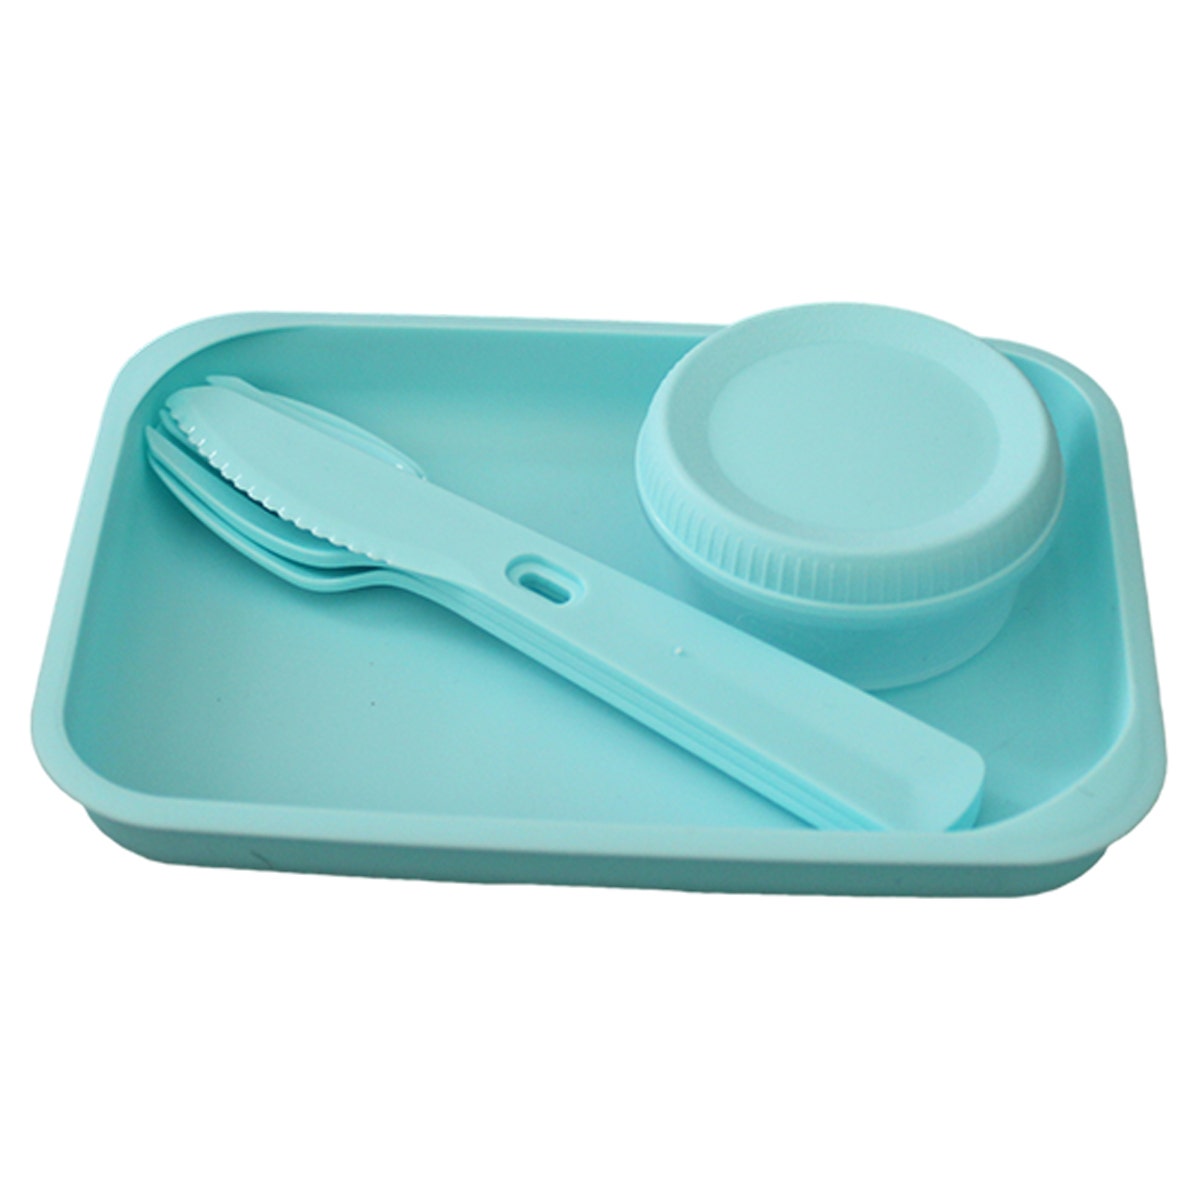 Curver Smart To Go 1.2L Lunch Kit - Utensils, Cup, Locking Lid